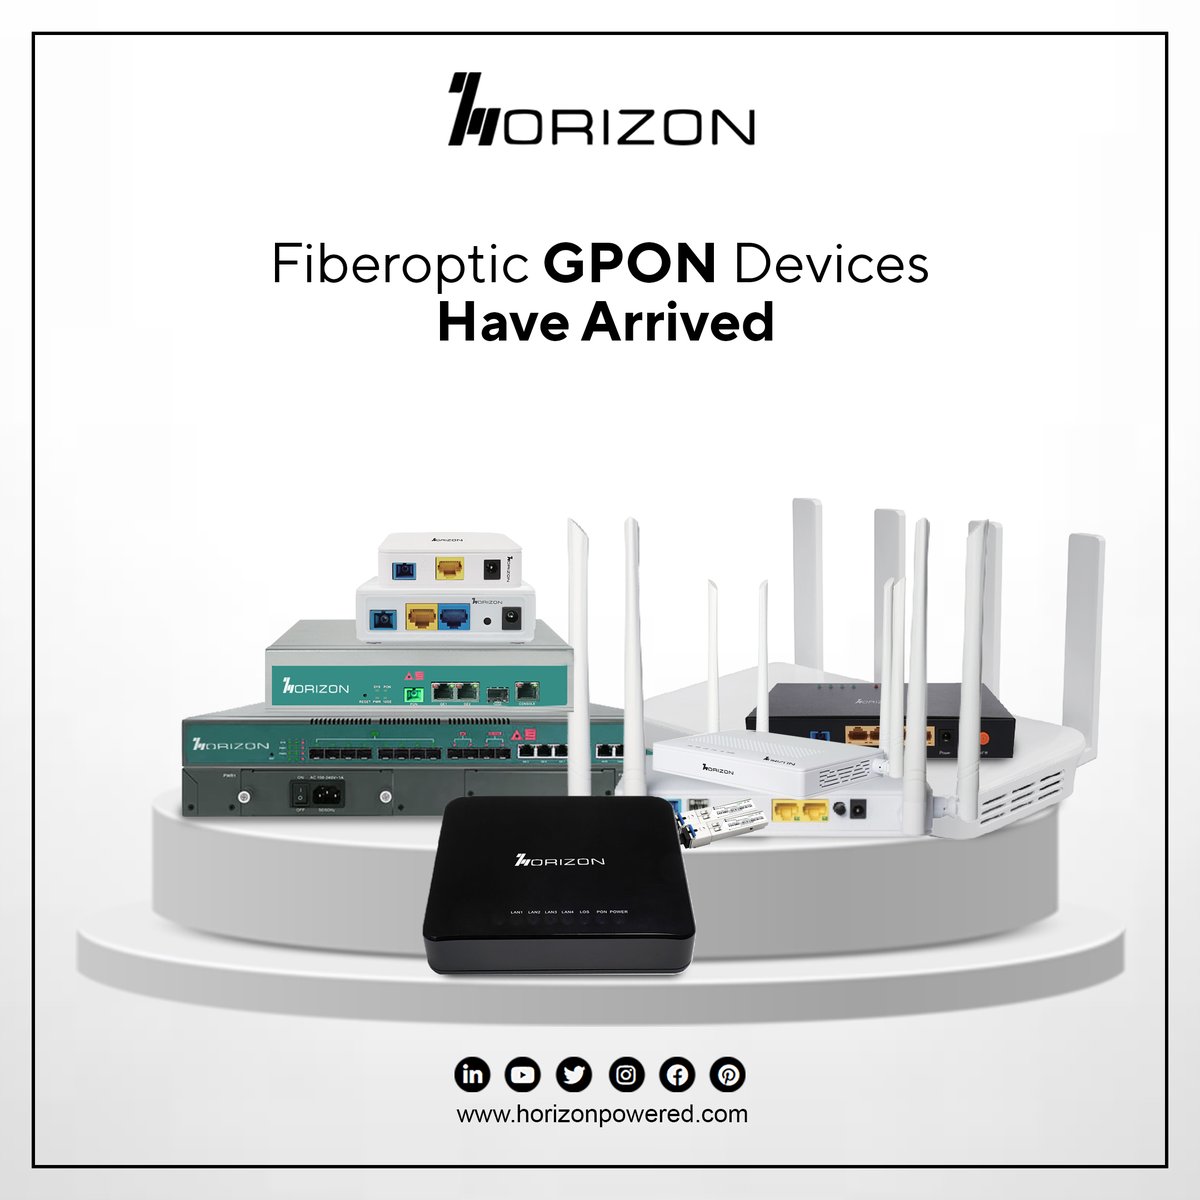 We are excited to unveil a wide range of #Fiberoptic #GPON devices that will allow users to access high speed internet connection and connect wirelessly.
horizonpowered.com
#IndoorRouter #Broadband #VoIP #FixedWirelessAccess #broadbandaccess #5G #technology #tech #internet